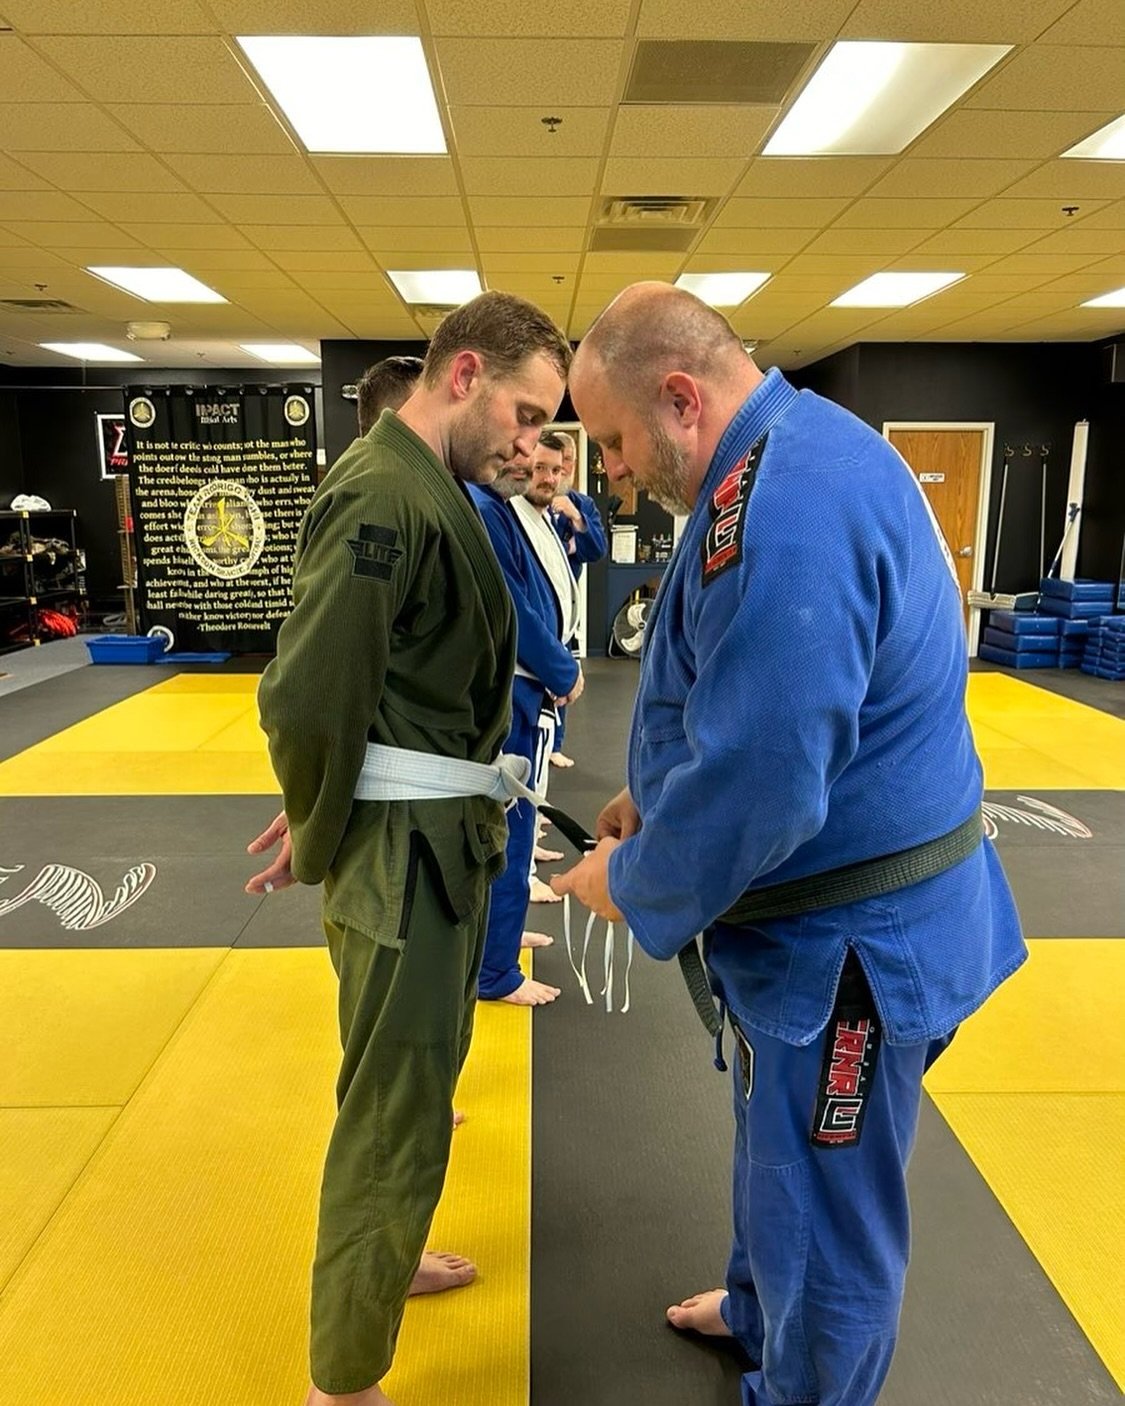 Last weekend we had a stripe promotion!! Congratulations Aaron! 👏🎉🥋

#Fortitude #bjj #downtown #neenah #wisconsin #selfdefense #fighting #fitness #getinshape #gohomesafe #promotion #stripe #bjjlife #onthemat #celebrate